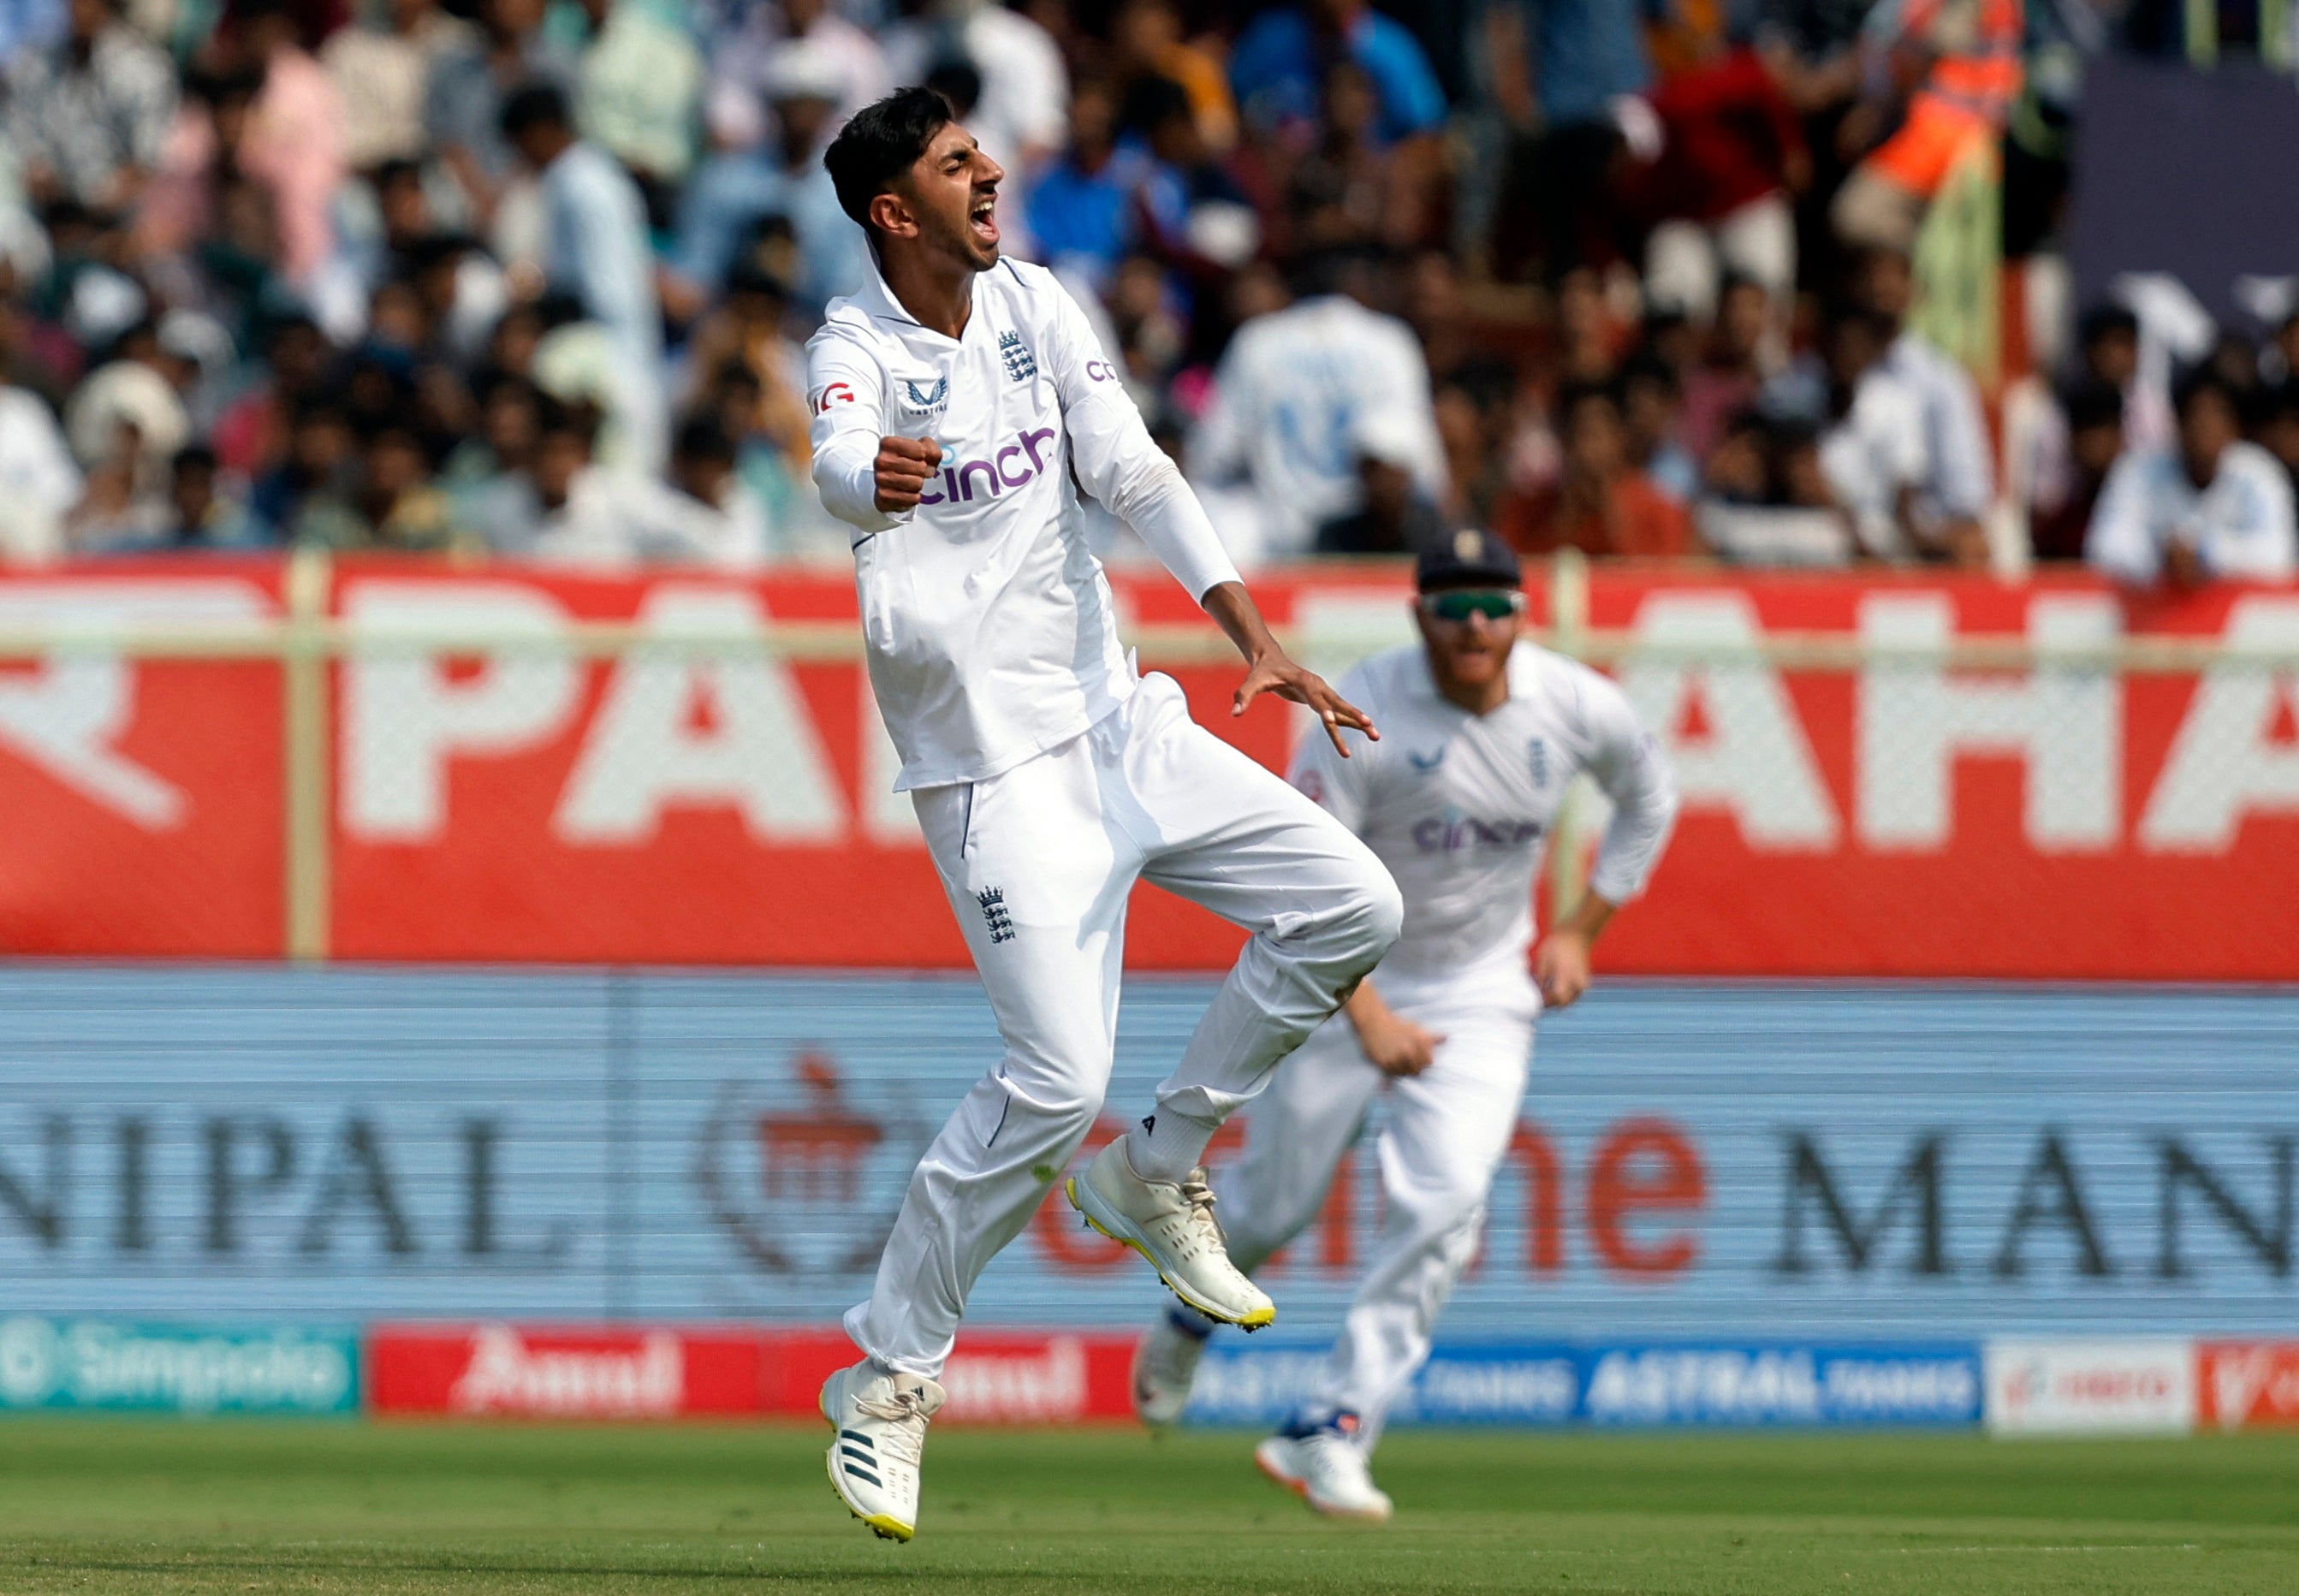 Shoaib Bashir took the wicket of Rohit Sharma for his maiden Test scalp